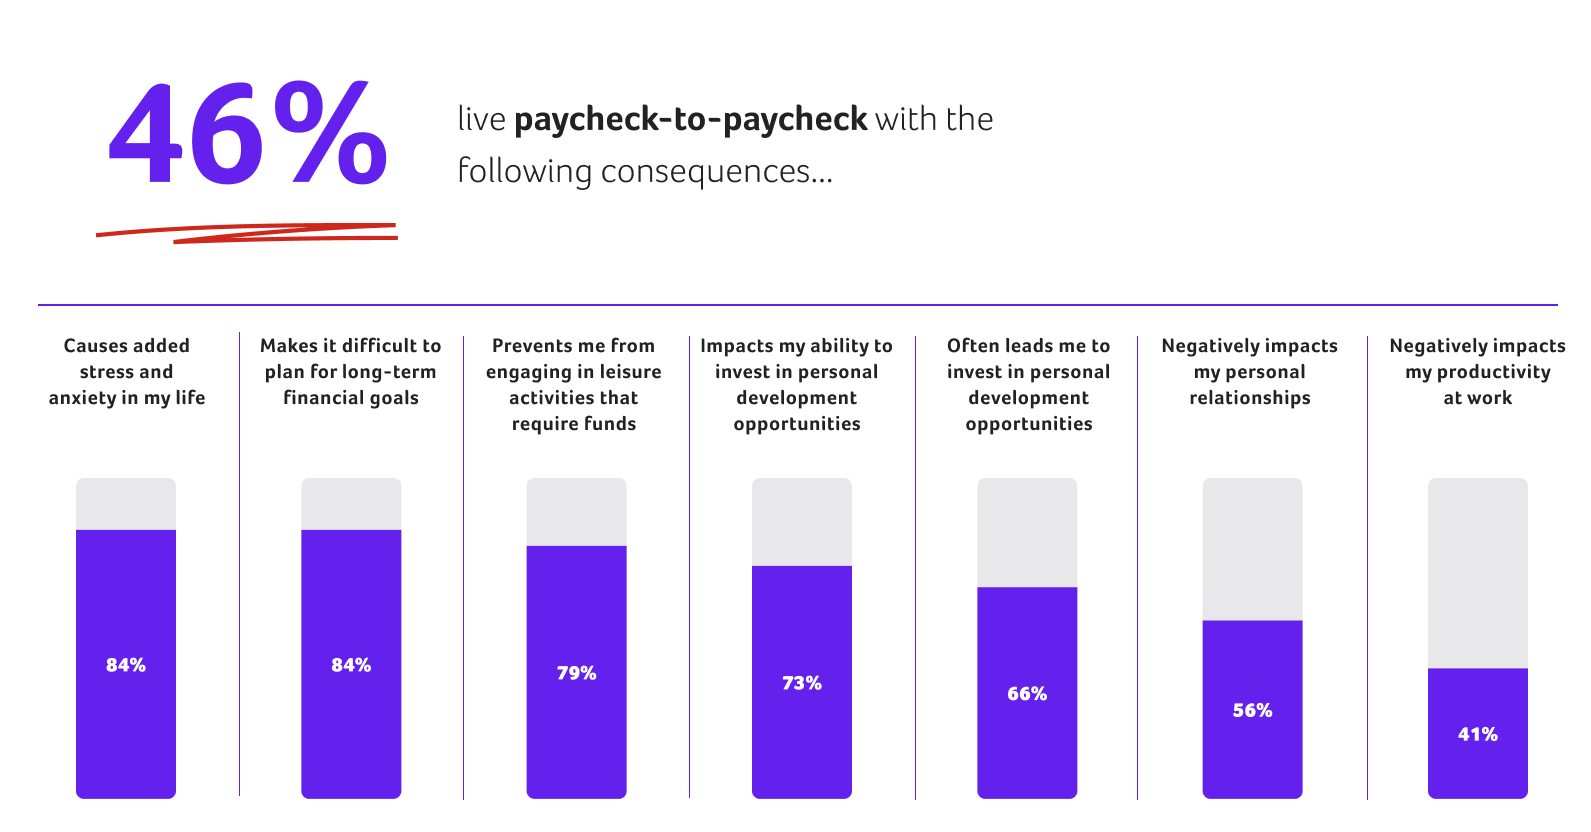 bar chart with heading that reads 46% (of study participants) live paycheck-to-paycheck with the following consequences...84% report living this way "causes added stress and anxiety in my life," 84% say it "makes it difficult to plan for long-term financial goals," 79% say "prevents me from engaging in leisure activities that require funds," 73% indicate it "impacts my ability to invest in personal development opportunities," 66% say "often leads me to invest in personal development opportunities," 56% say it "negatively impacts my personal relationships," and 41% say it "negatively impacts my productivity at work."